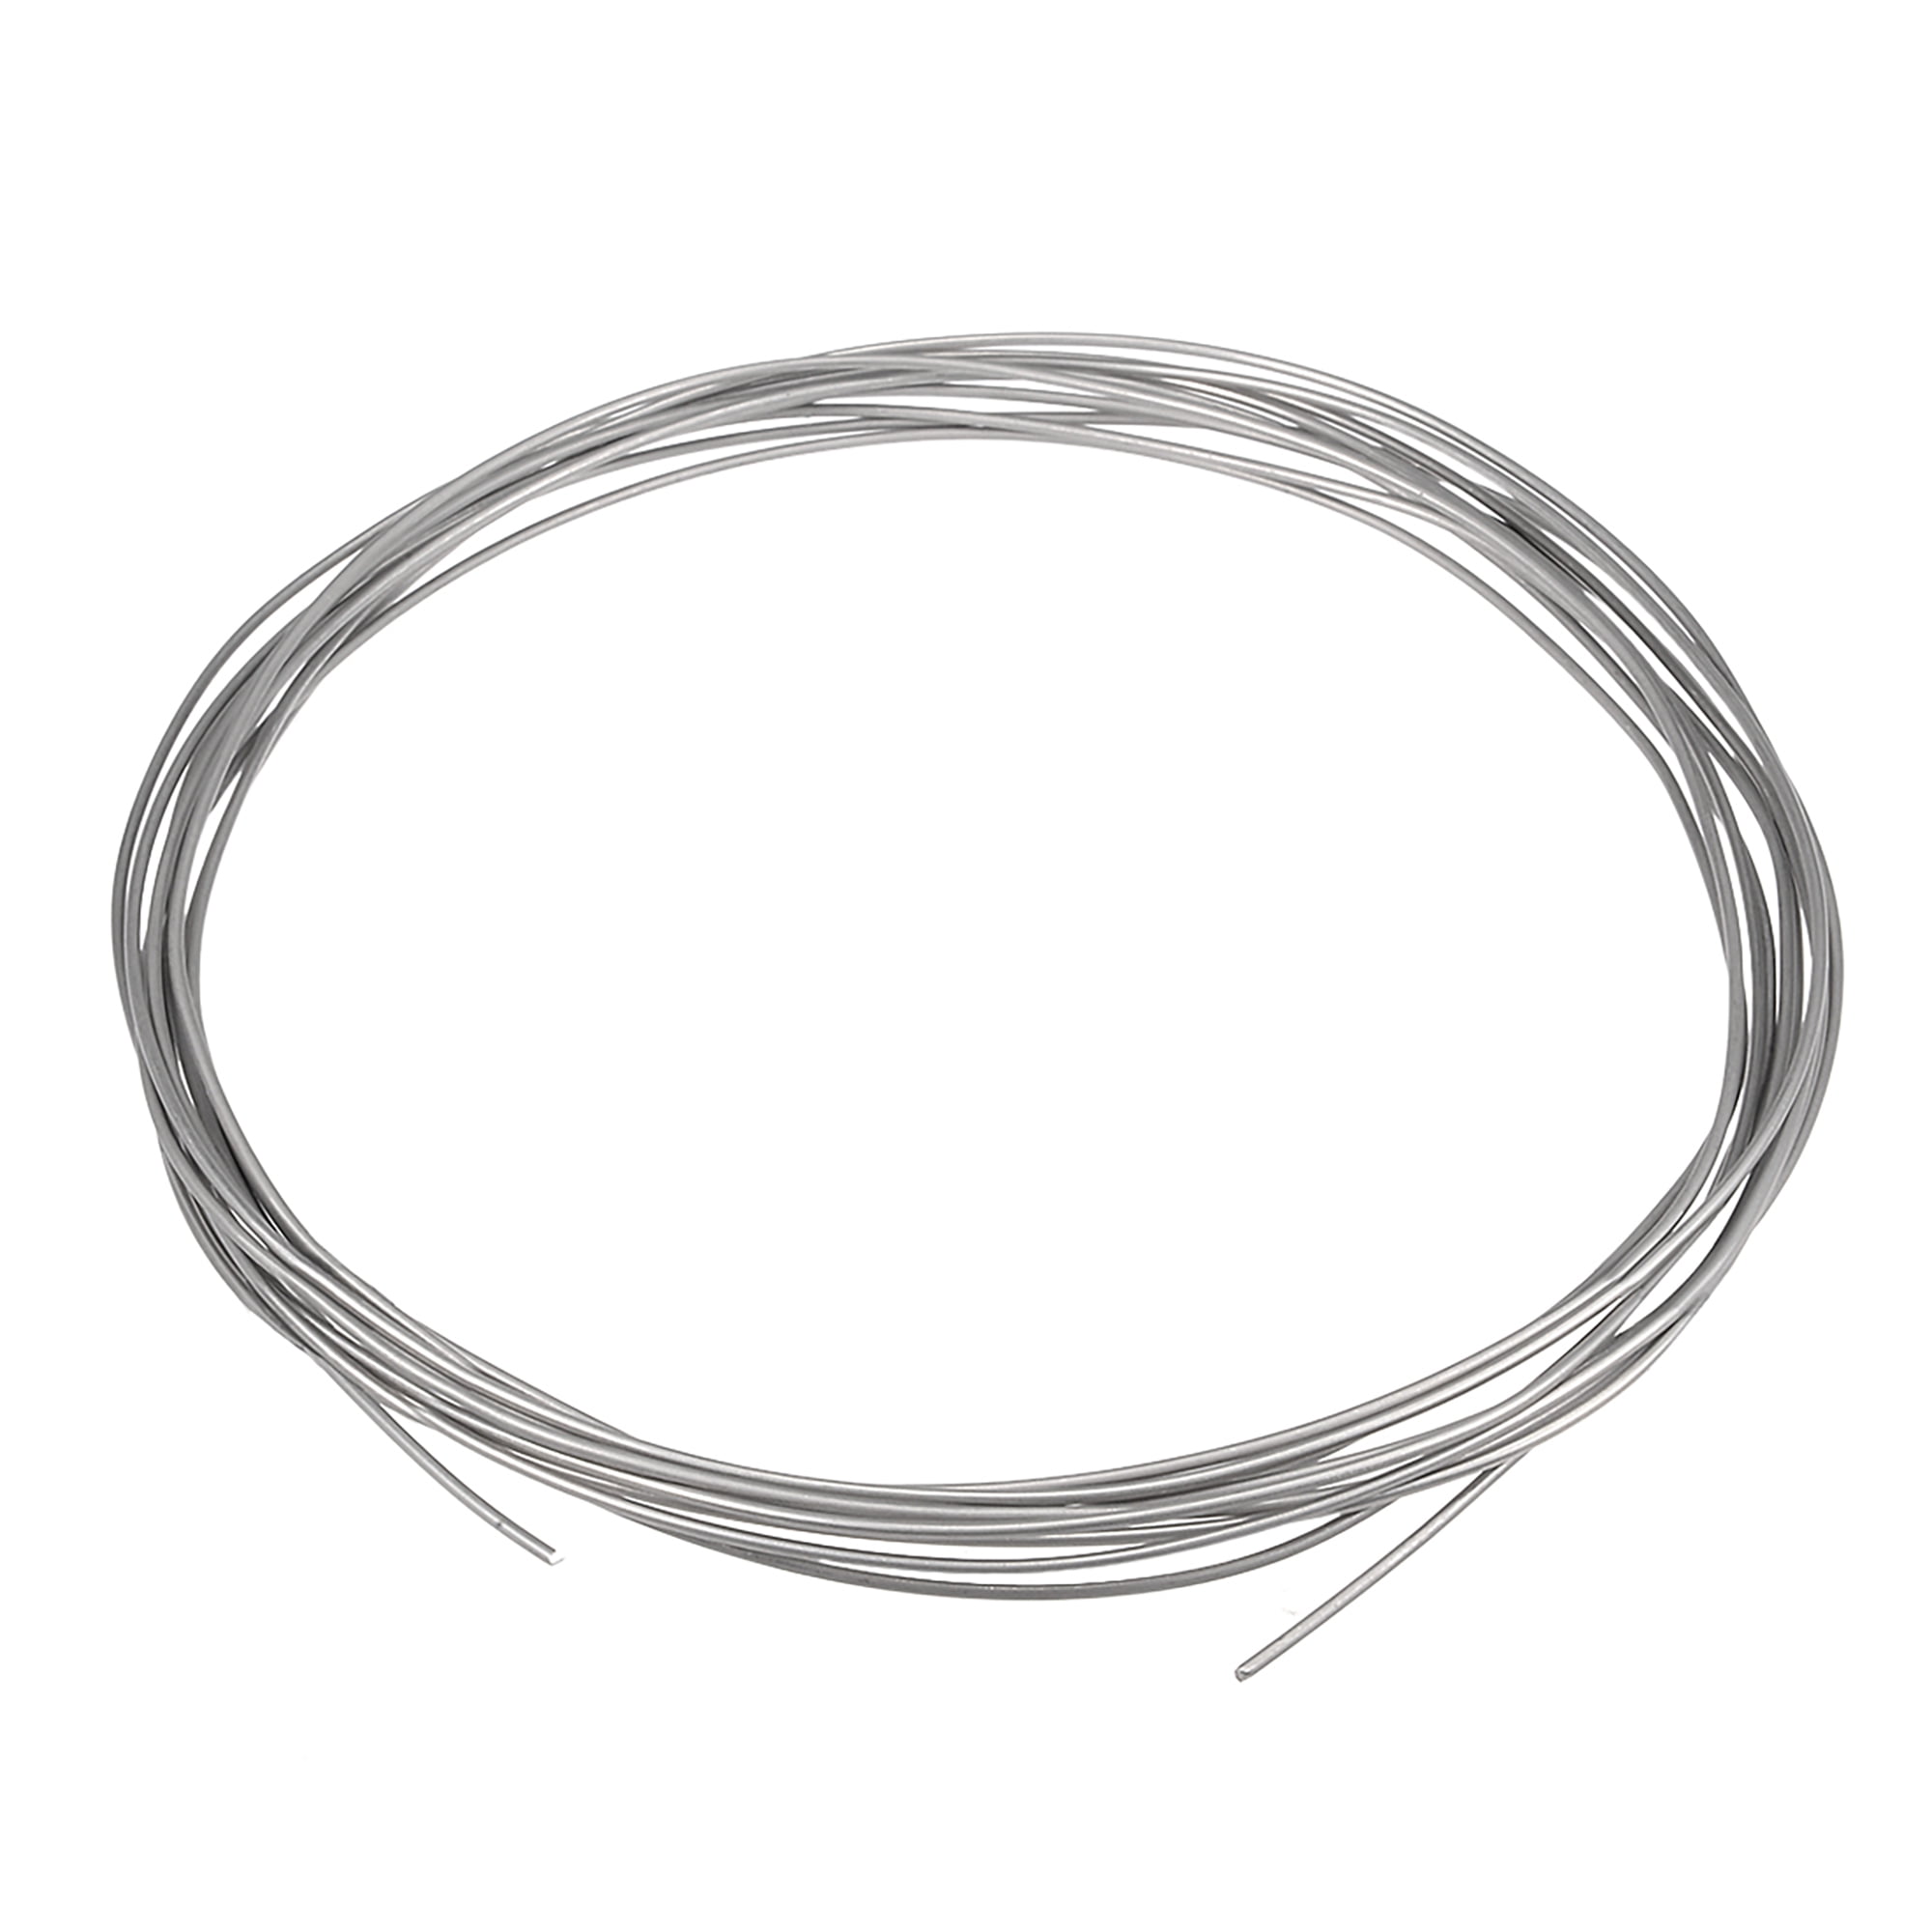 1 6mm 14awg Heating Resistor Wire